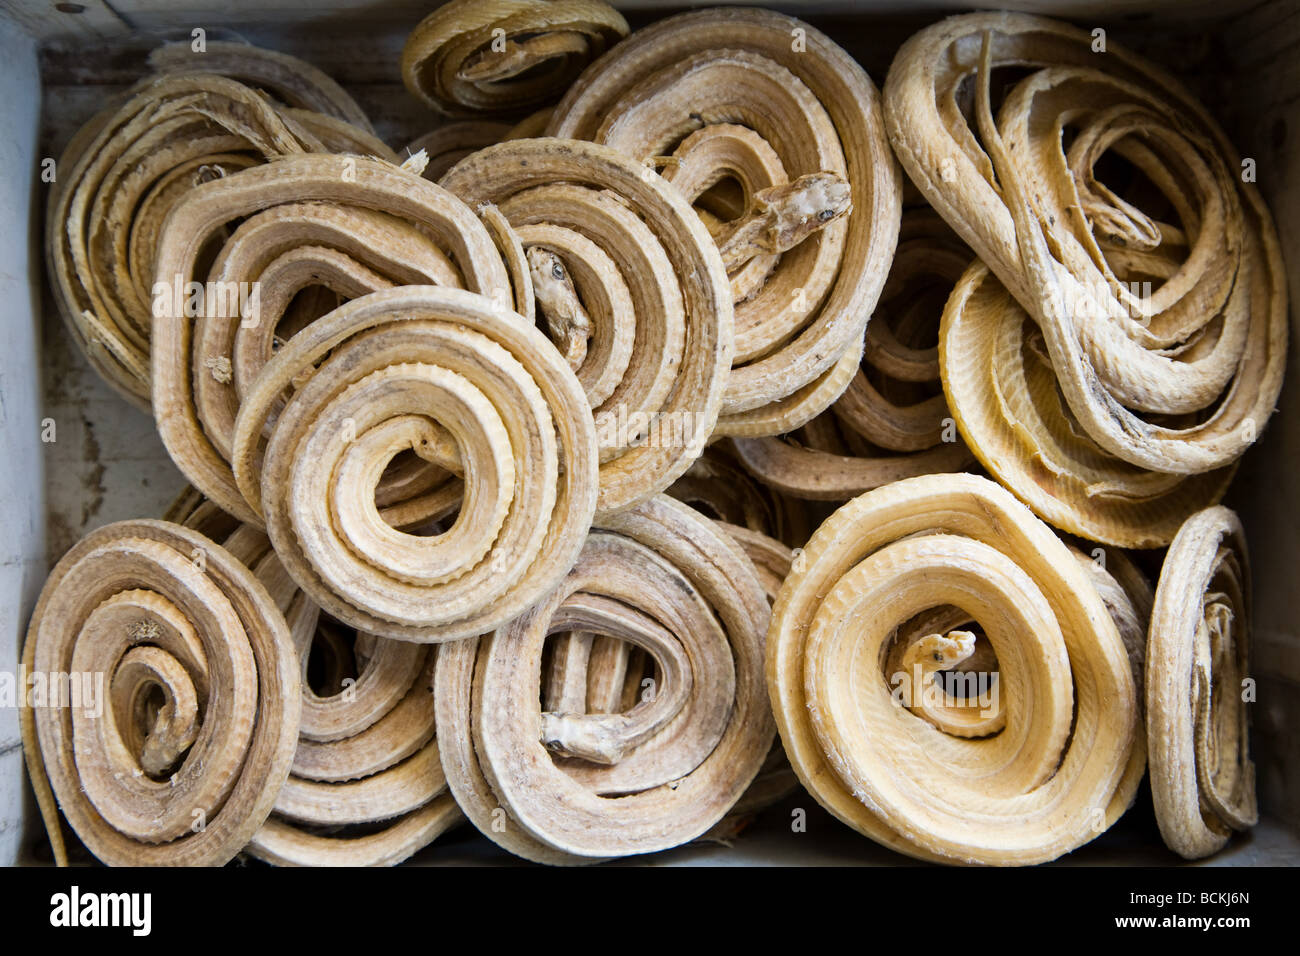 Dried coiled snakes in markets Stock Photo